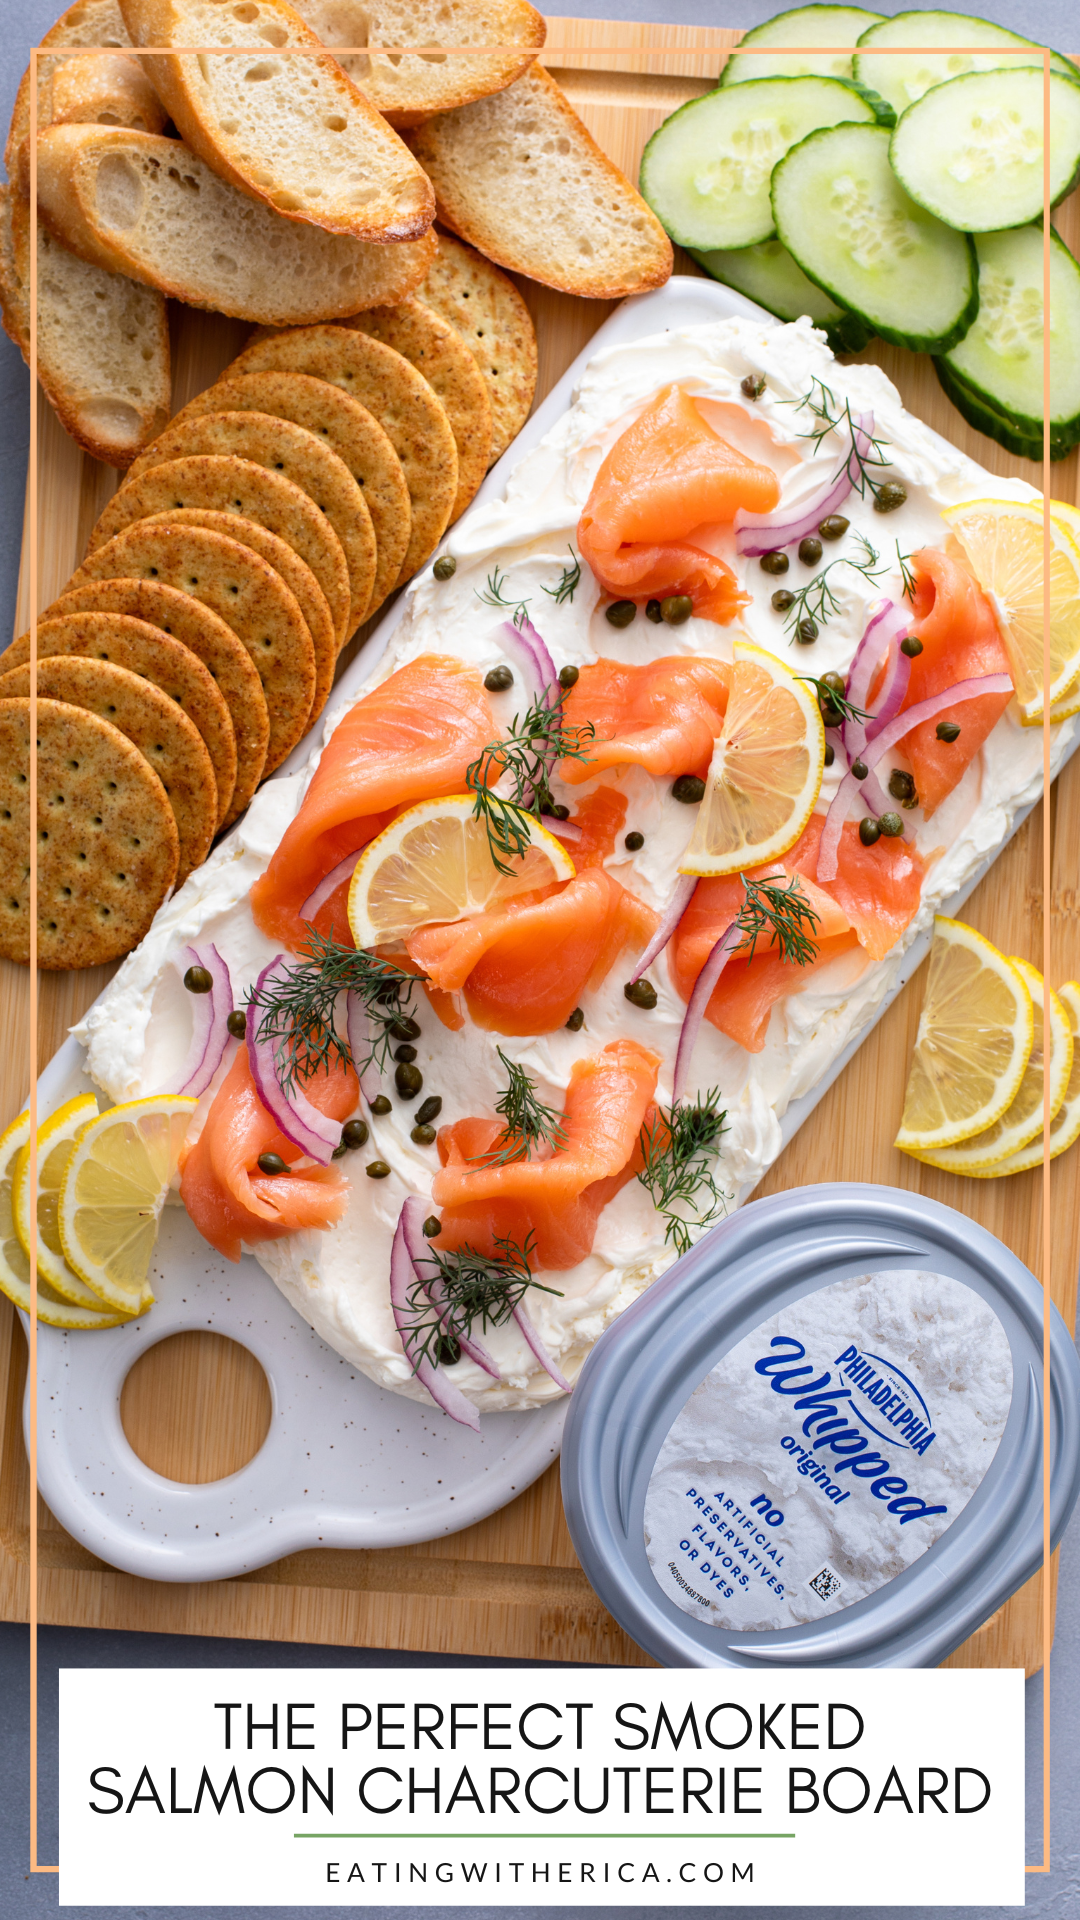 Looking for the perfect holiday Smoked Salmon Charcuterie Board? CLICK HERE to make the perfect board that will be a hit this holiday season and beyond! 